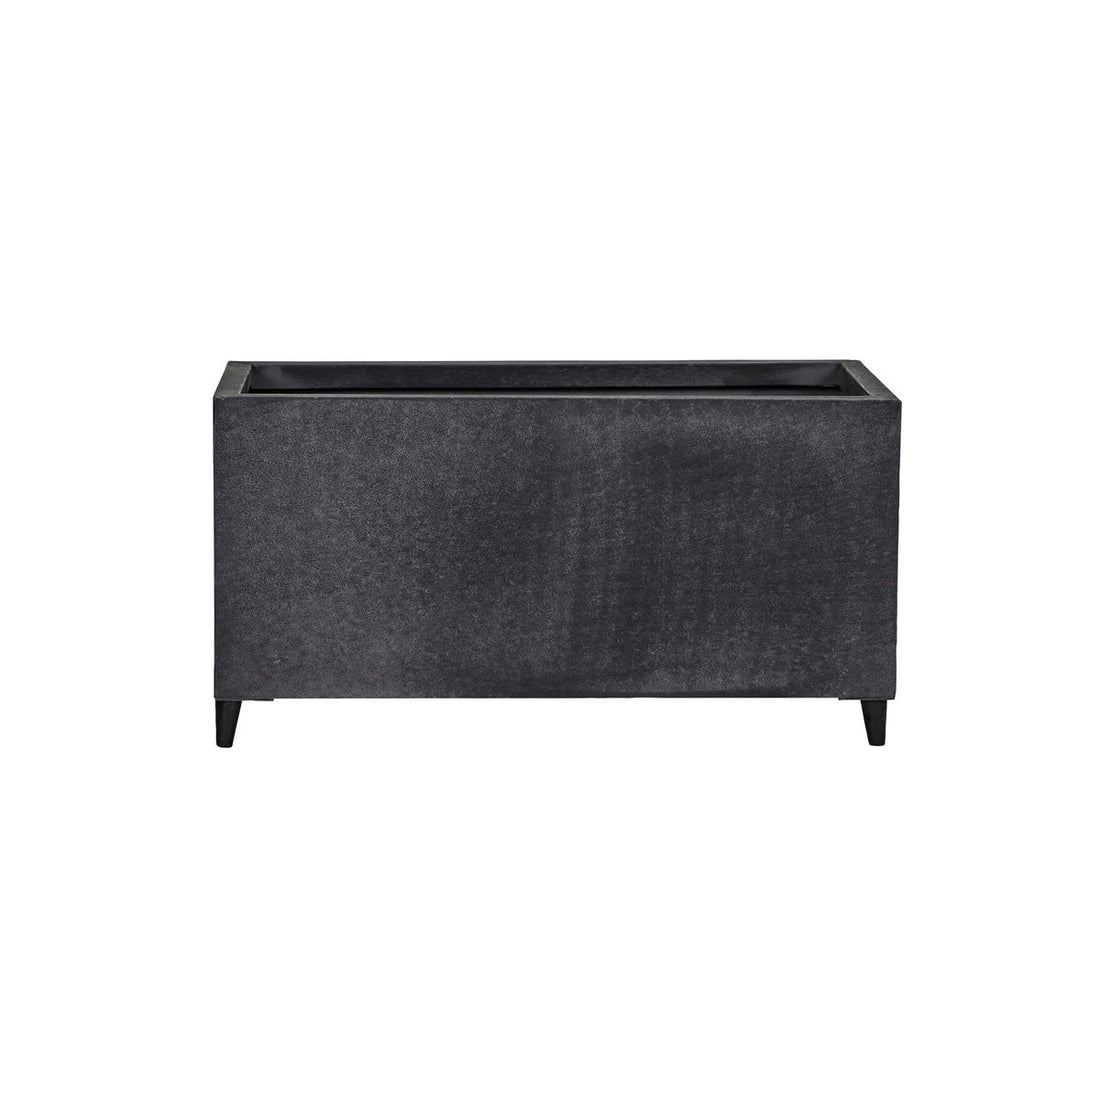 House Doctor Herb Pote, Hdfile, Gray